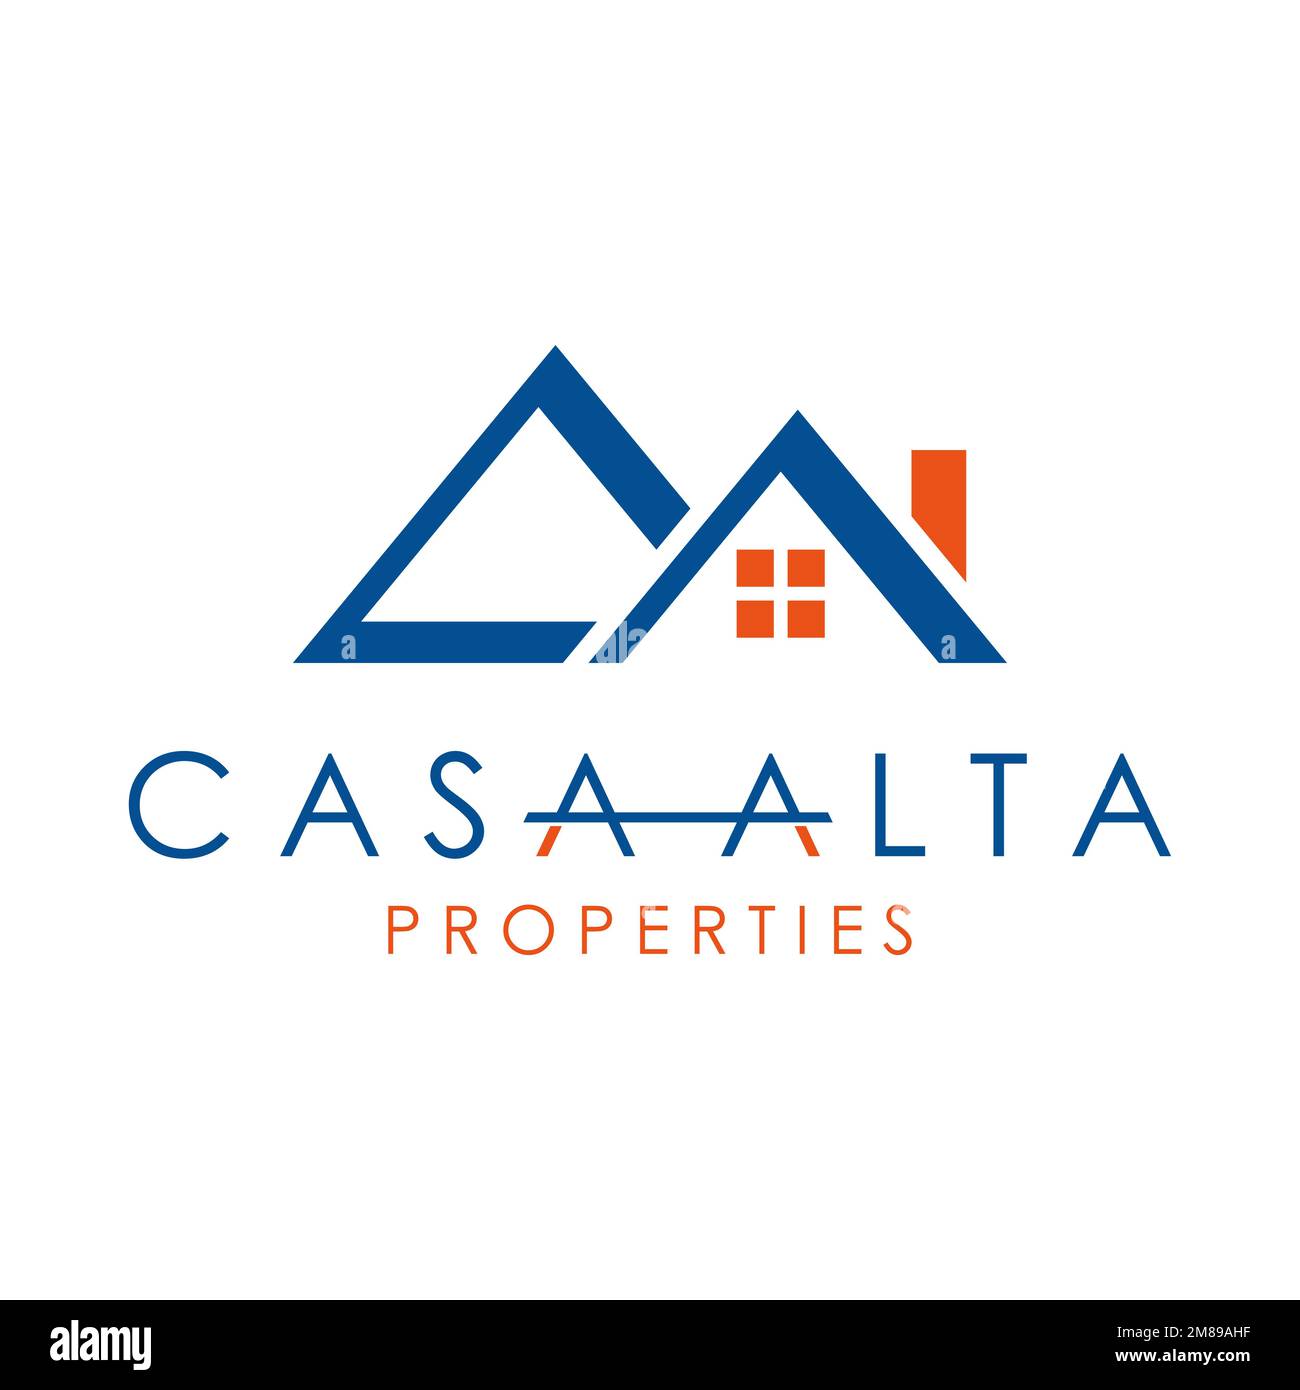 Simple house roof or letter or word CA font image graphic icon logo design abstract concept vector stock. Can be used as a symbol related to property Stock Vector